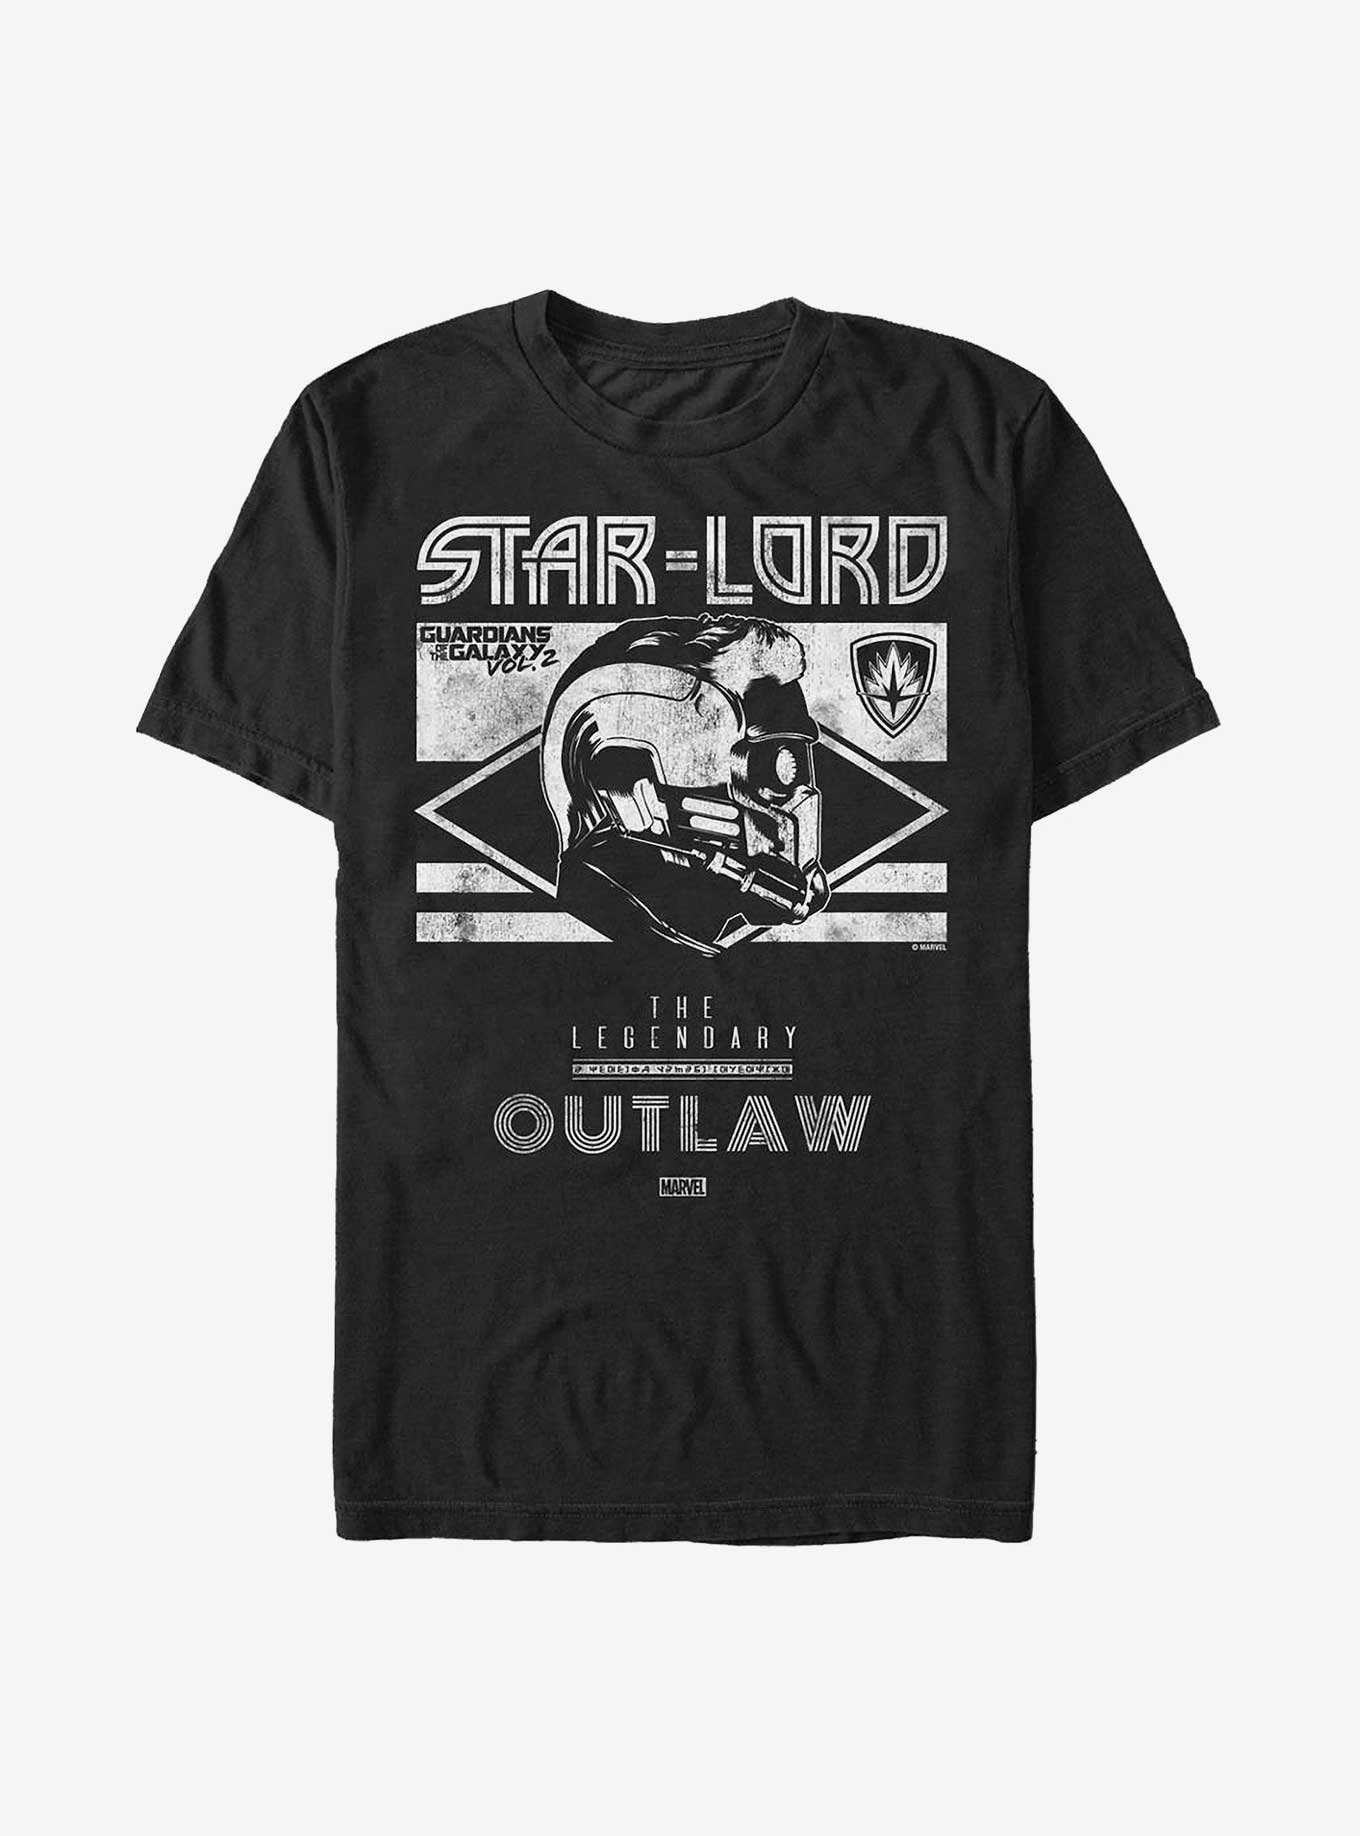 Marvel Guardians of the Galaxy Star-Lord Profile Legendary Outlaw T-Shirt, , hi-res